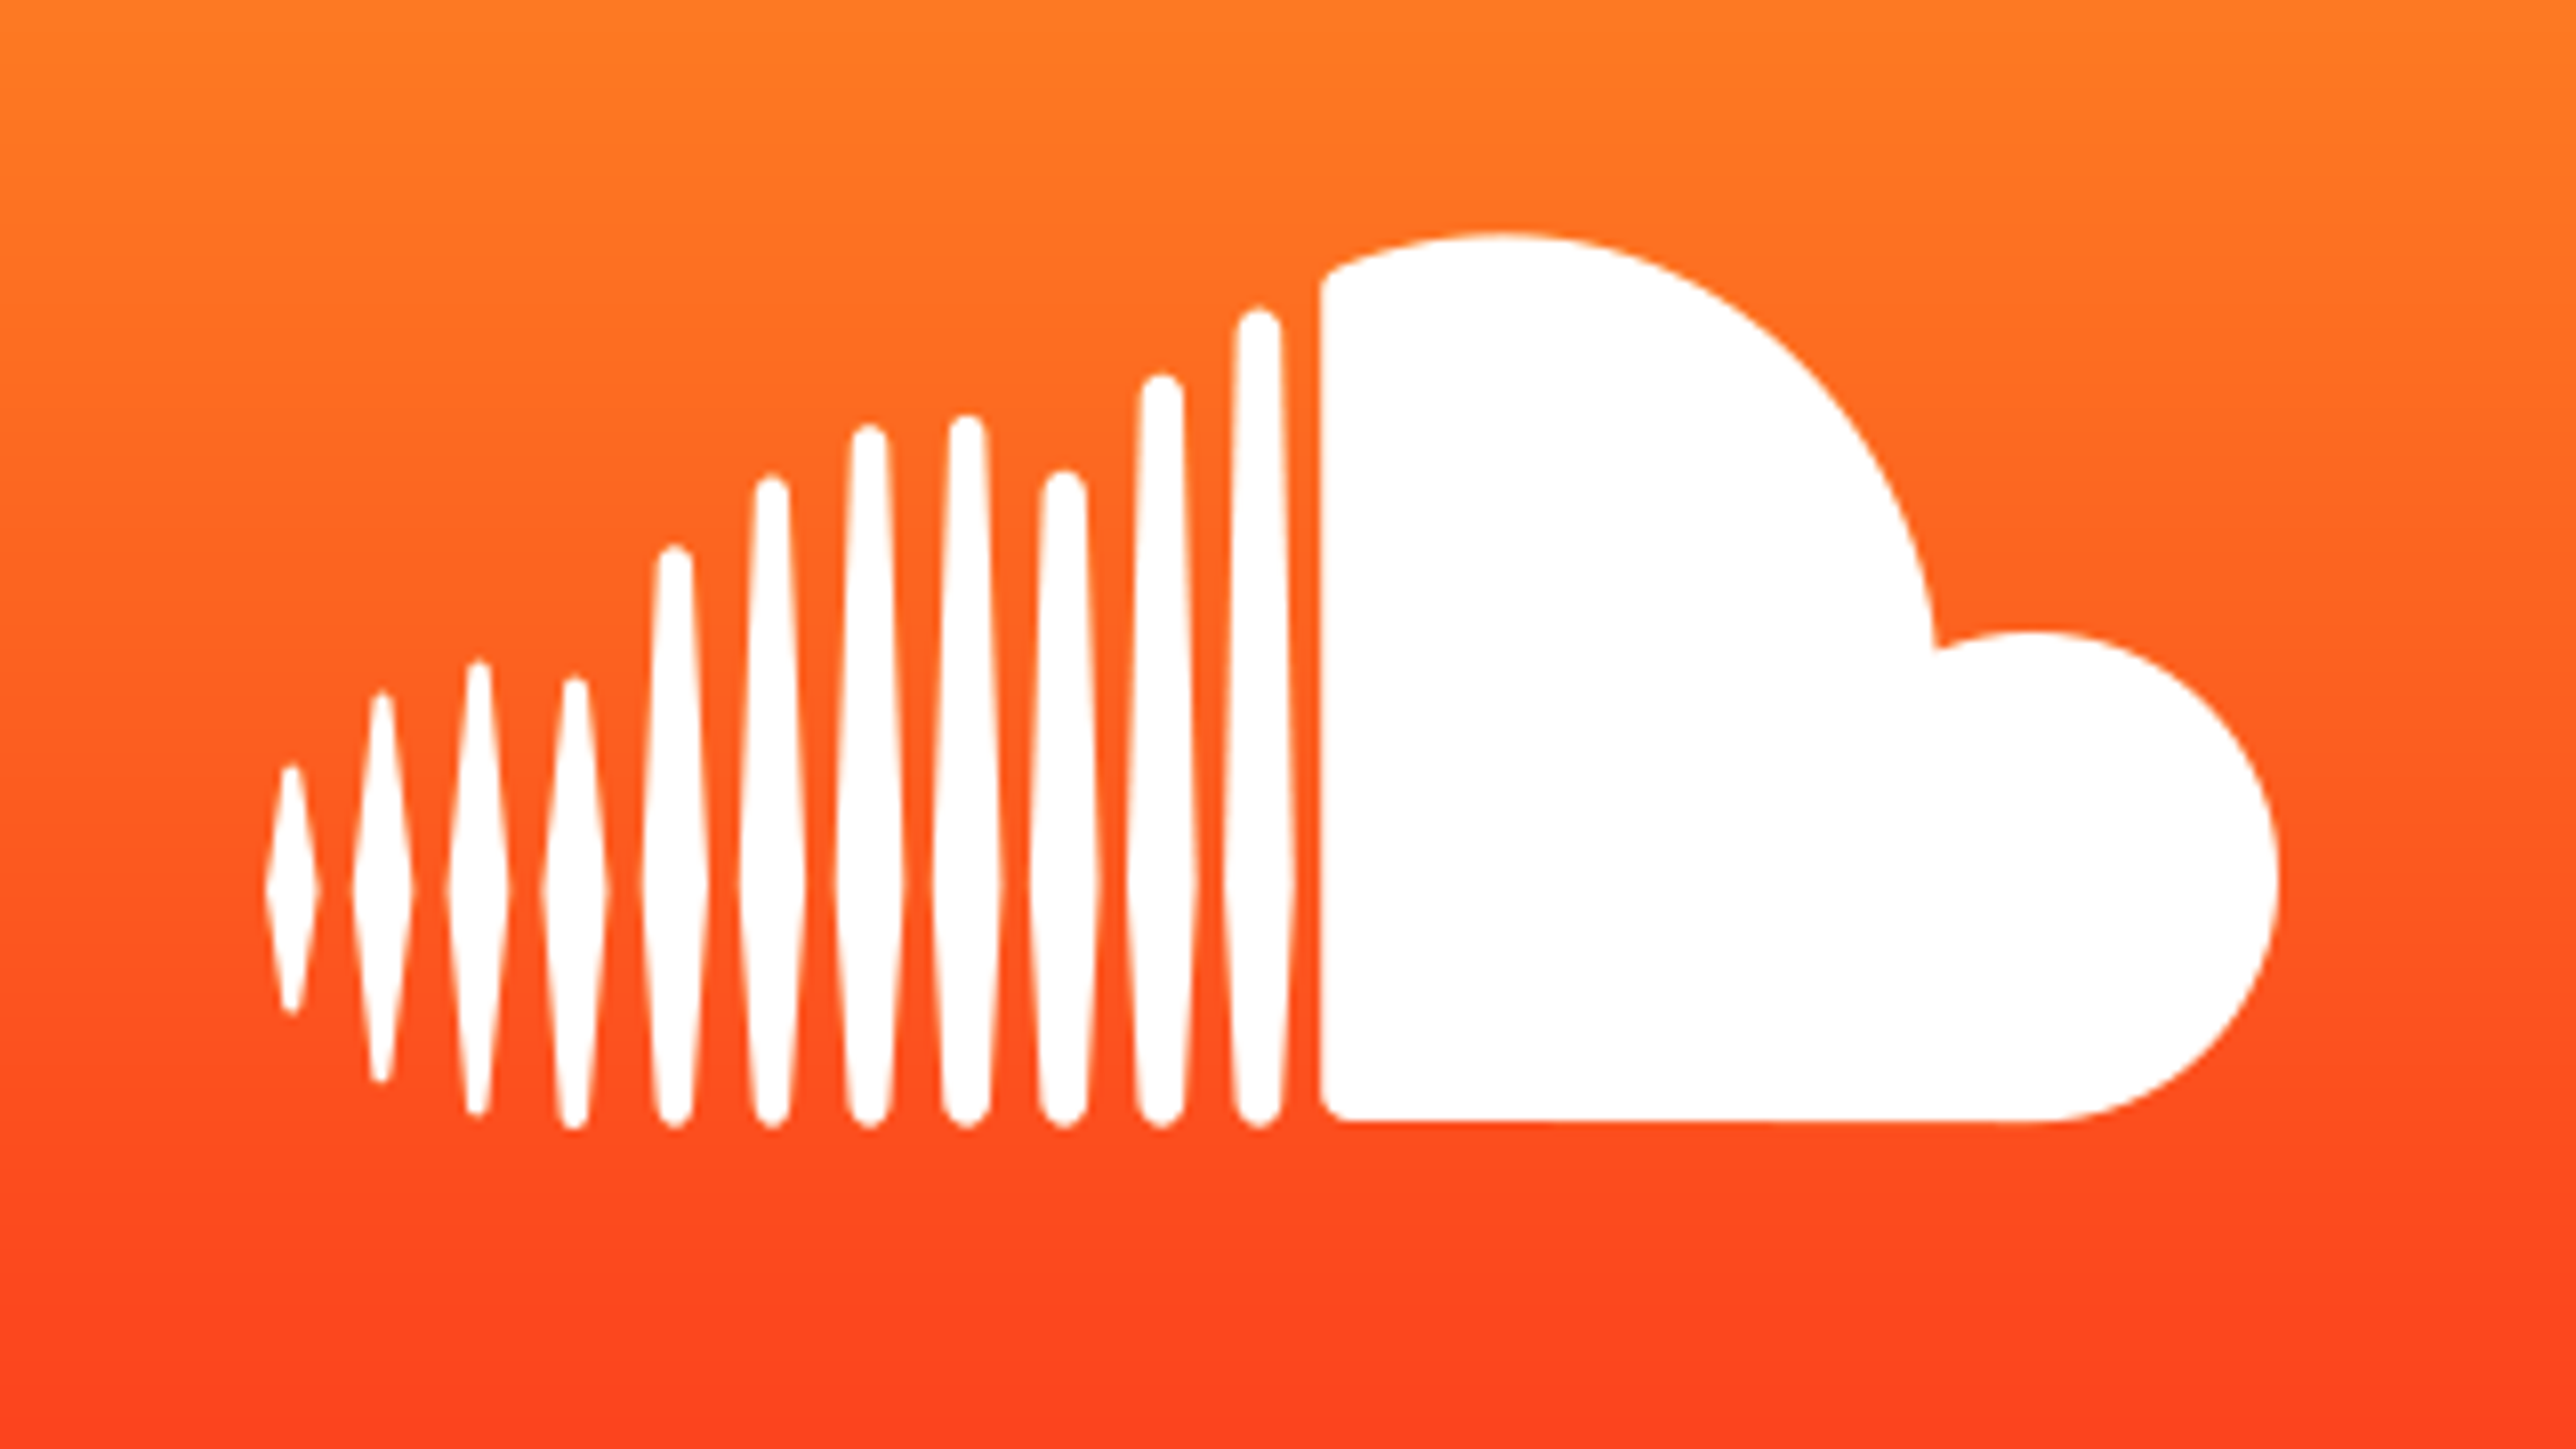 SoundCloud launches streaming music service